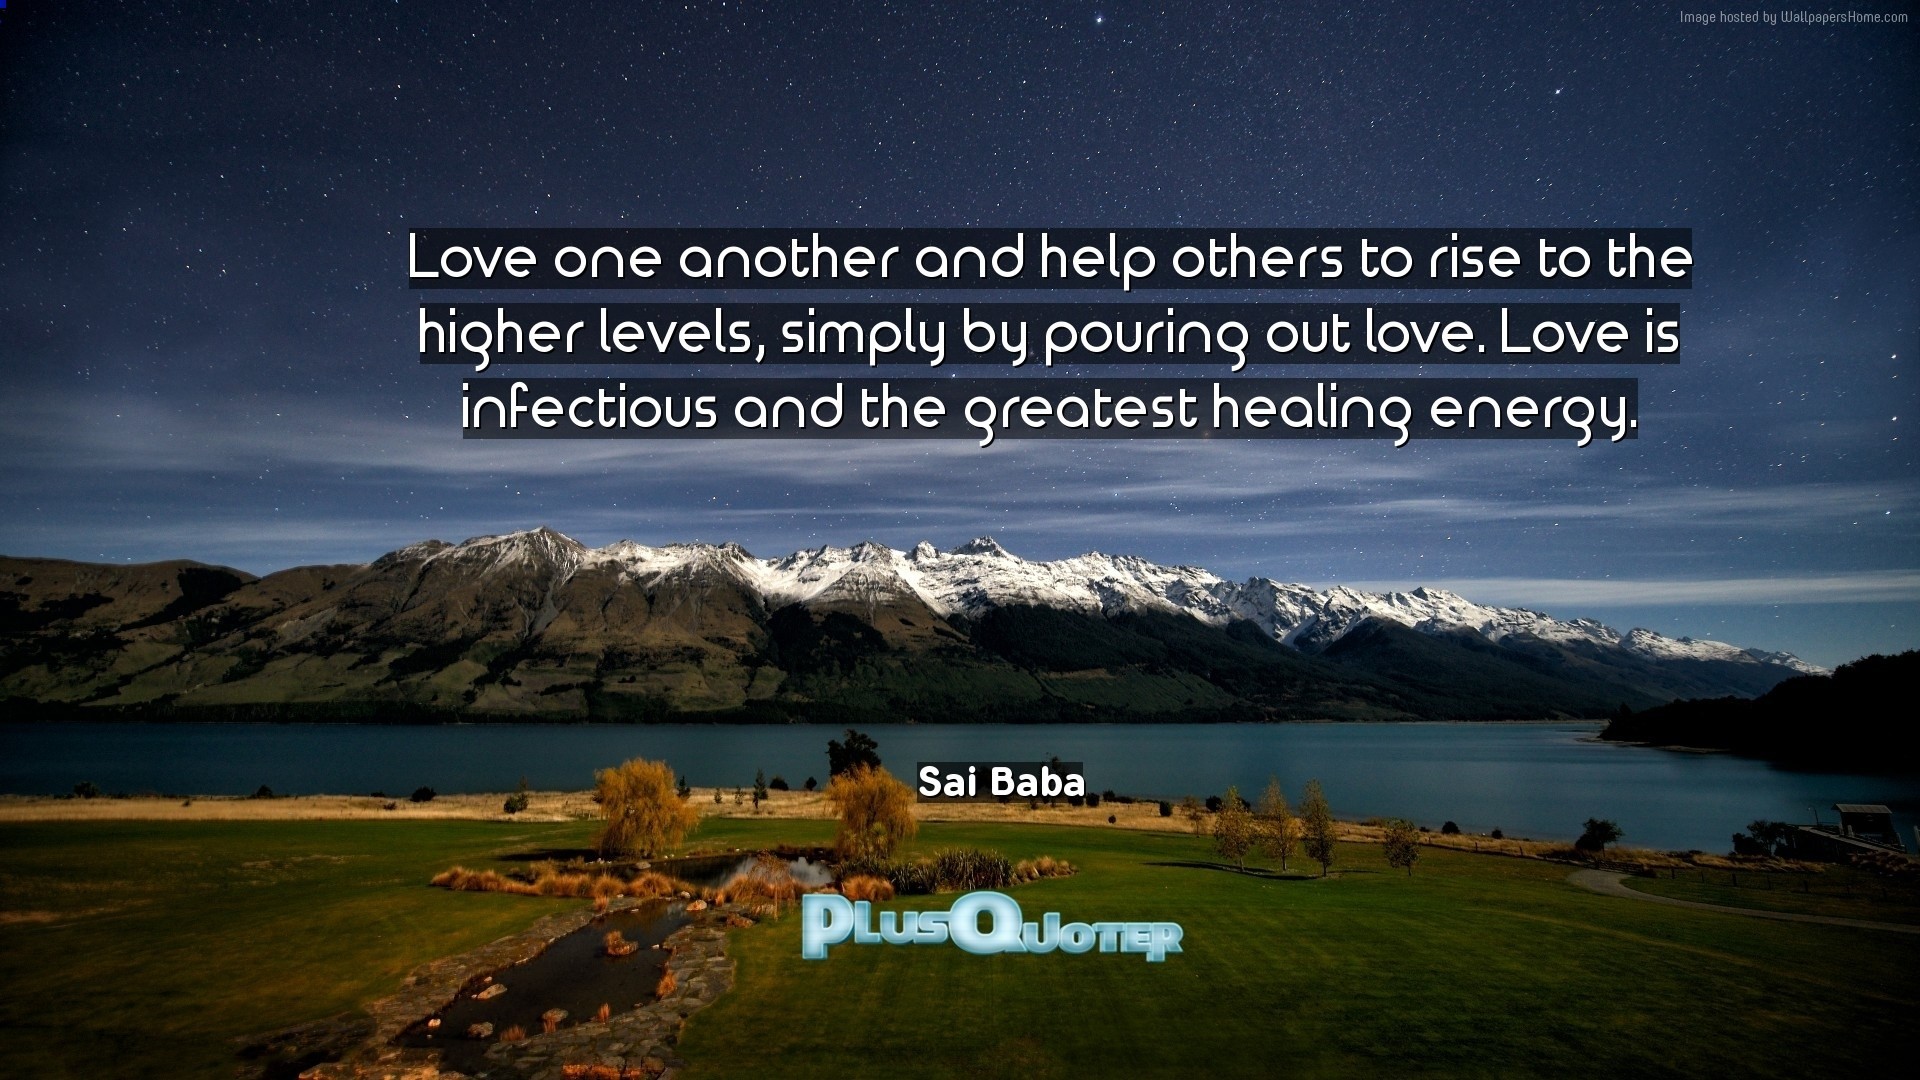 1920x1080 Download Wallpaper with inspirational Quotes- "Love one another and help  others to rise to